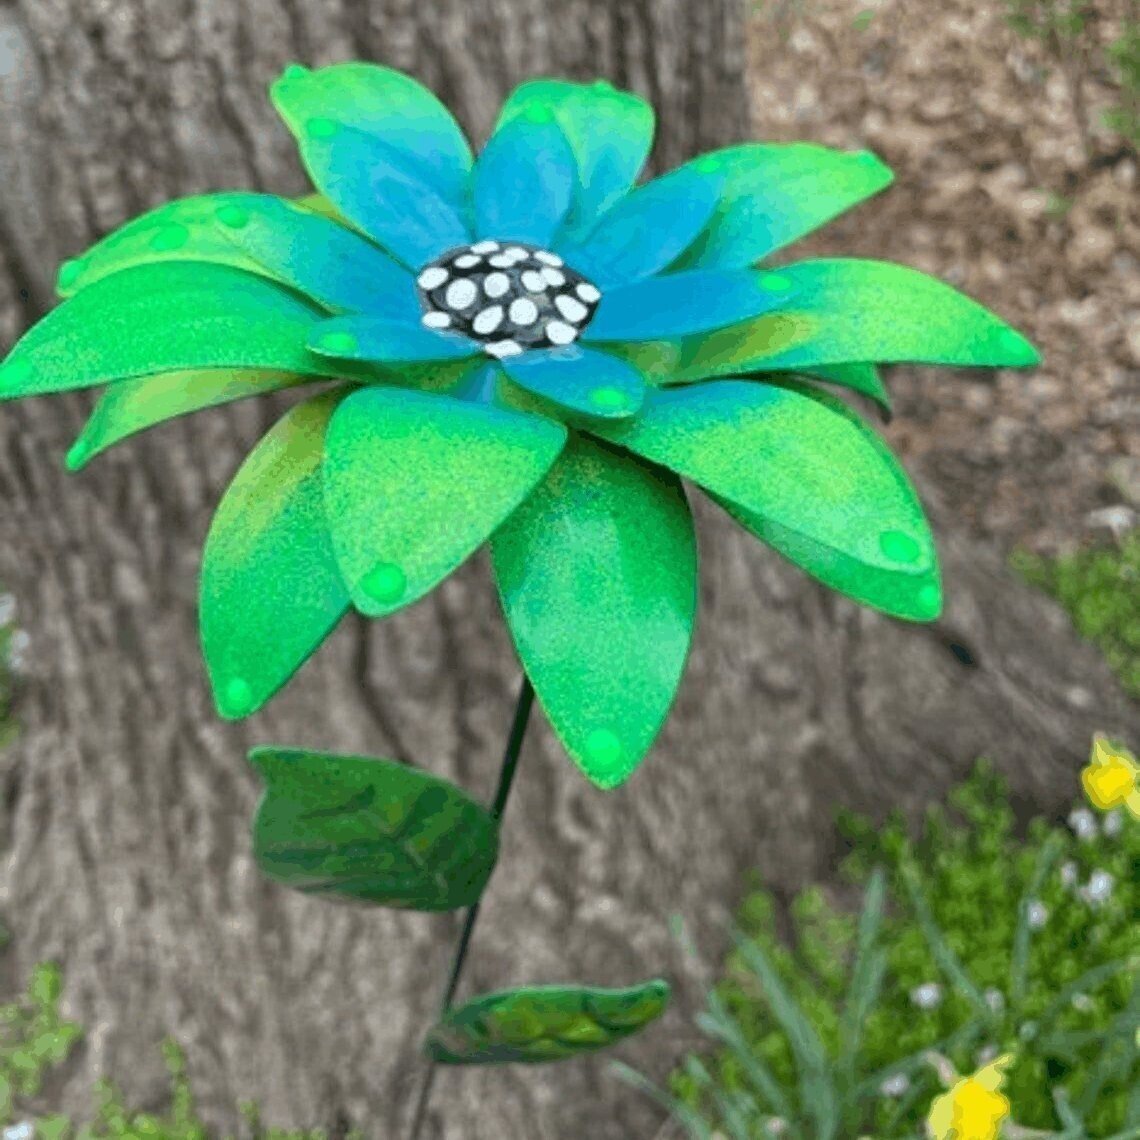 🌼Unleash the Beauty of Your Garden! Grab our Metal Flowers Garden Stakes at a Sizzling 49% OFF!🌼